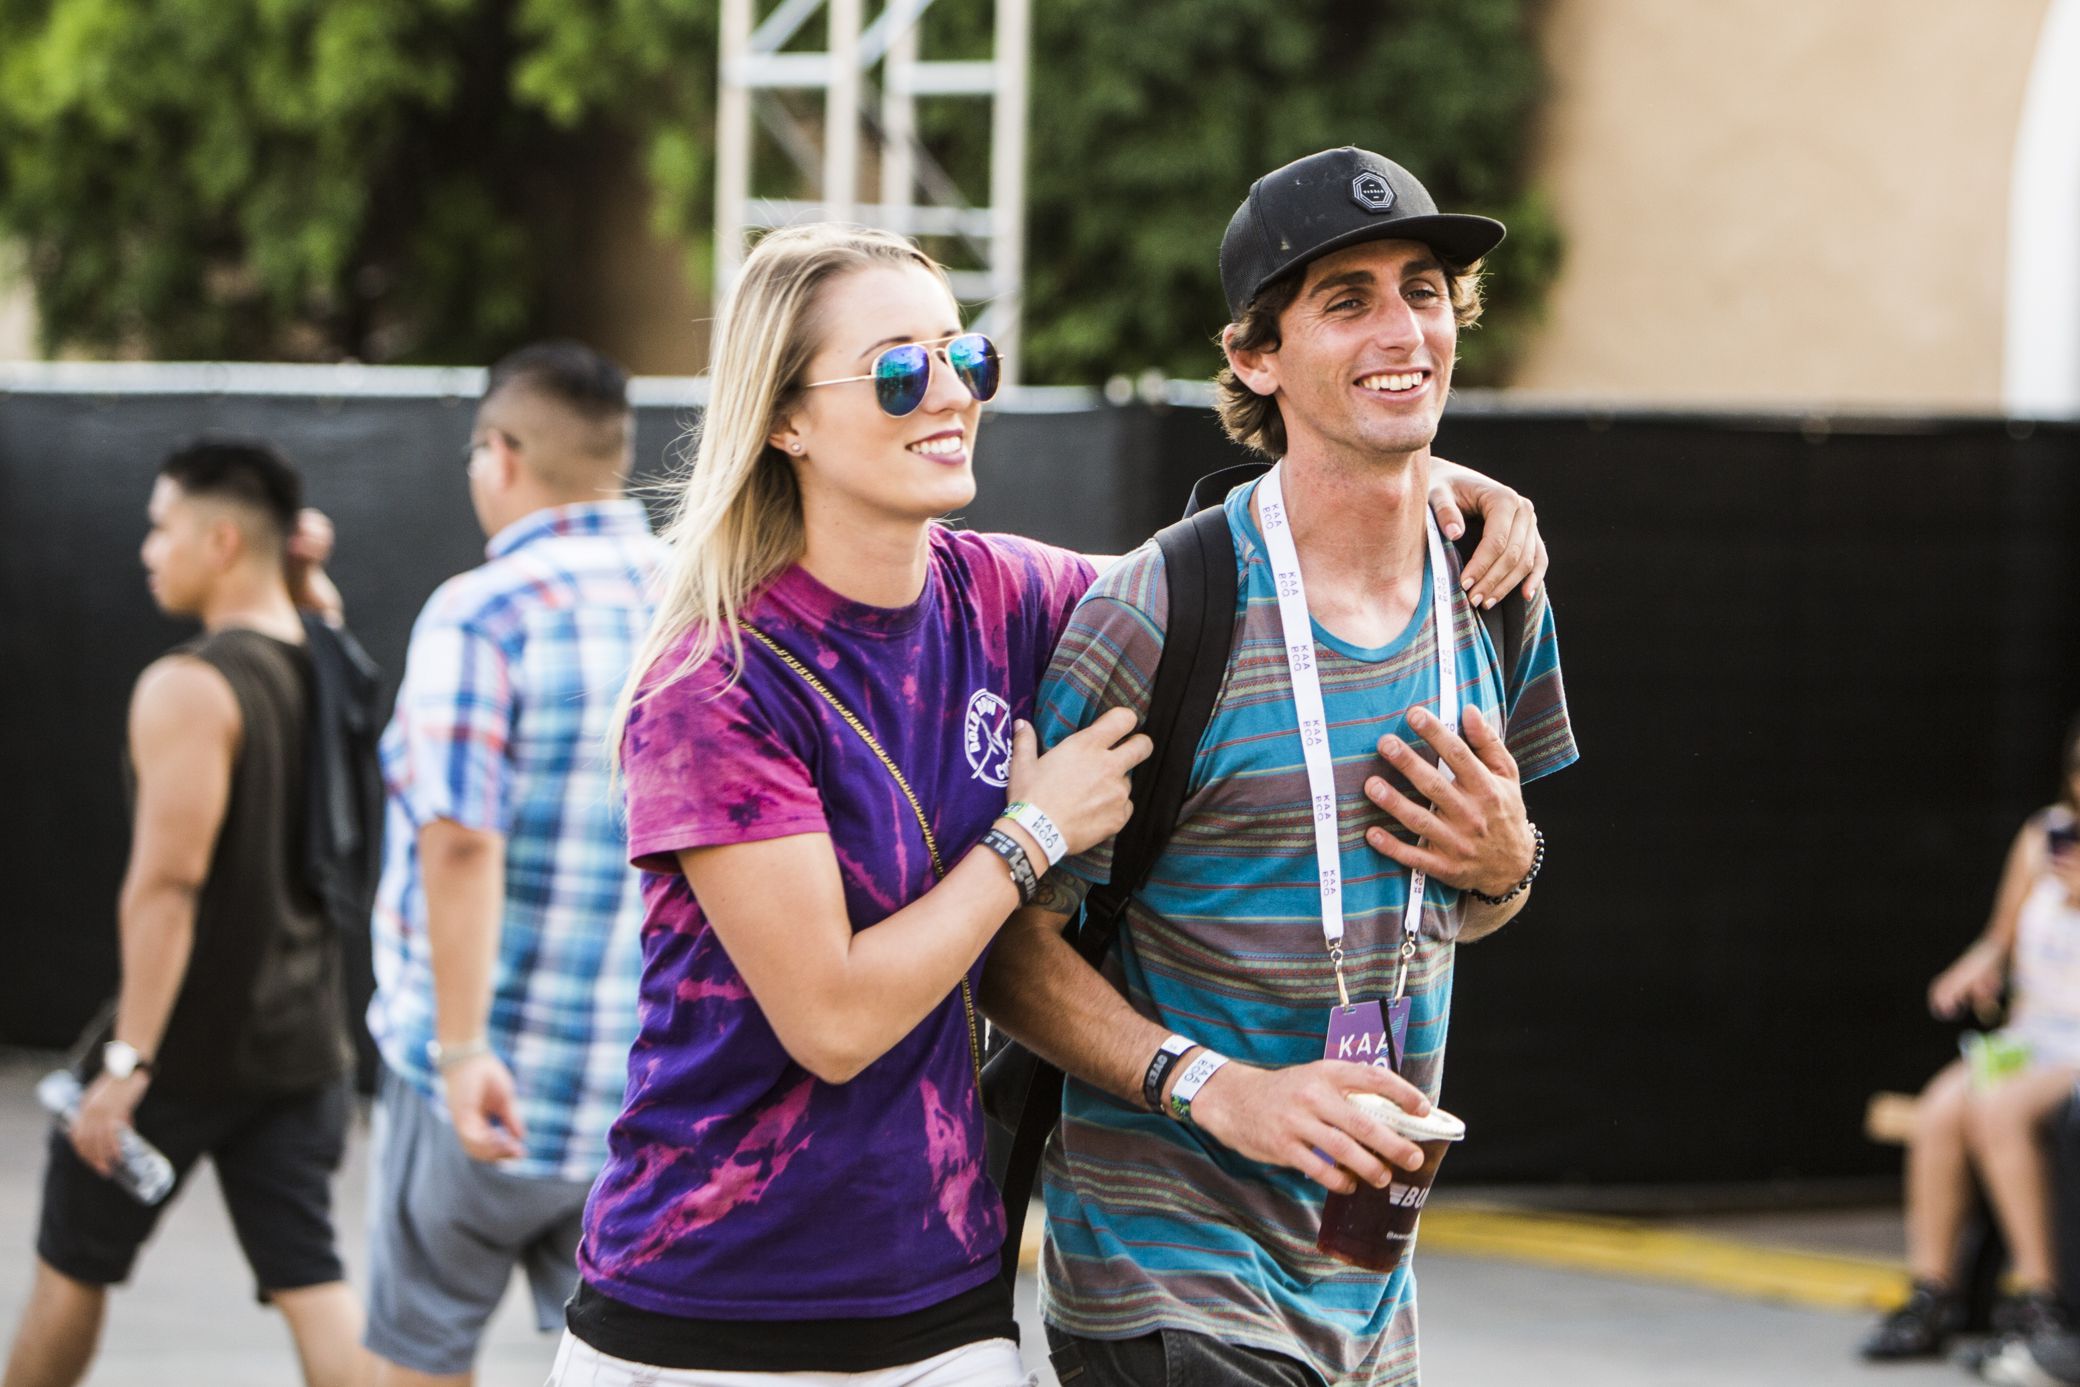 kaaboo 8 KAABOO Del Mar Succeeds at Being a Festival for Everyone